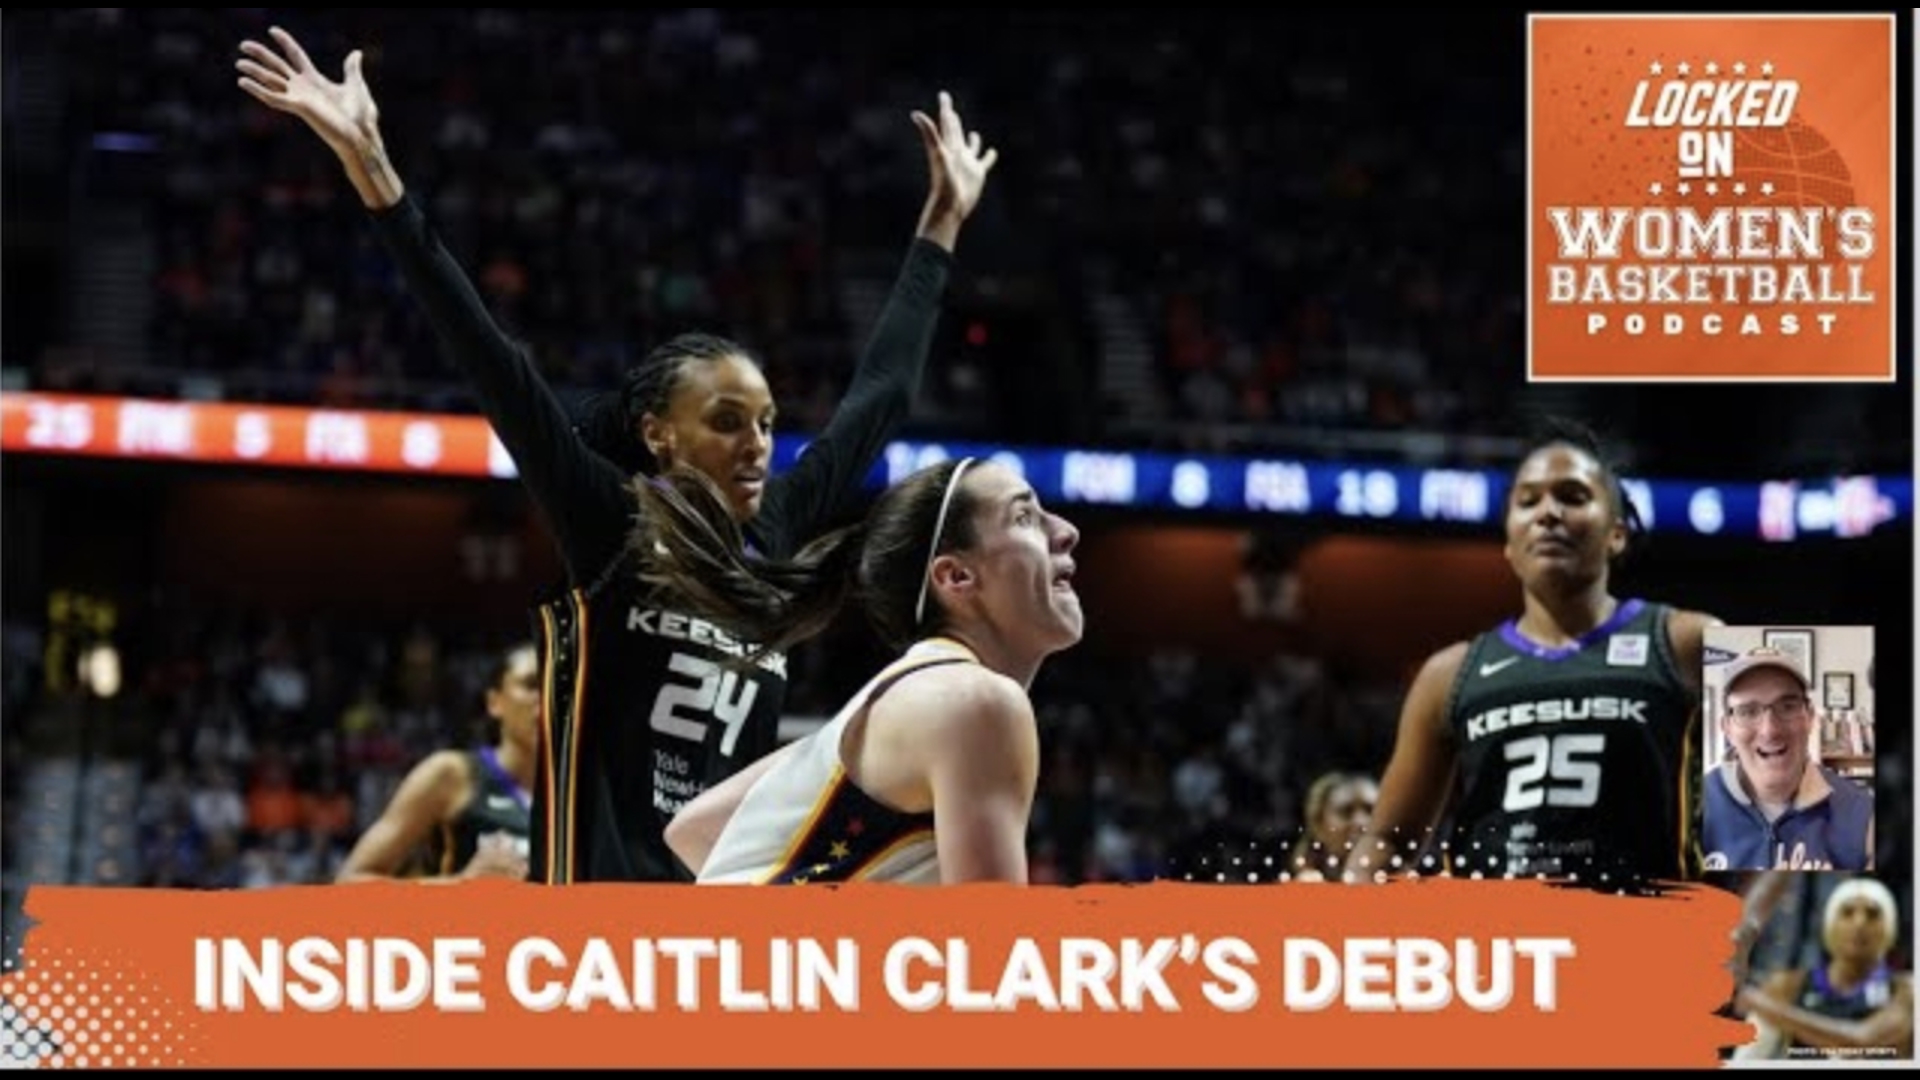 Caitlin Clark and the Indiana Fever began their season at Mohegan Sun Arena hoping to play better than a 92-71 loss to Alyssa Thomas' Suns